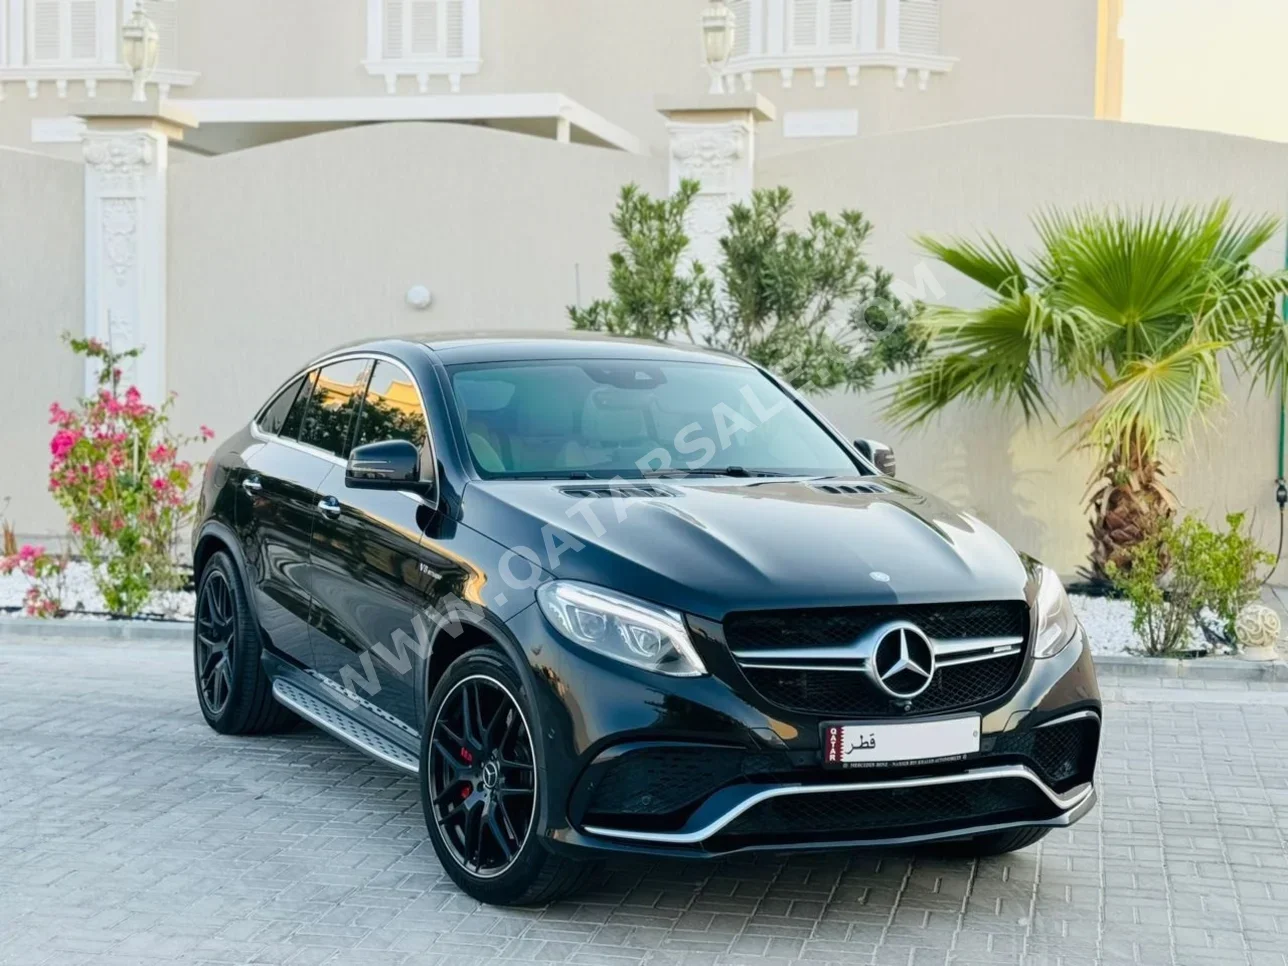 Mercedes-Benz  GLE  63S AMG  2016  Automatic  89,000 Km  8 Cylinder  Four Wheel Drive (4WD)  SUV  Black